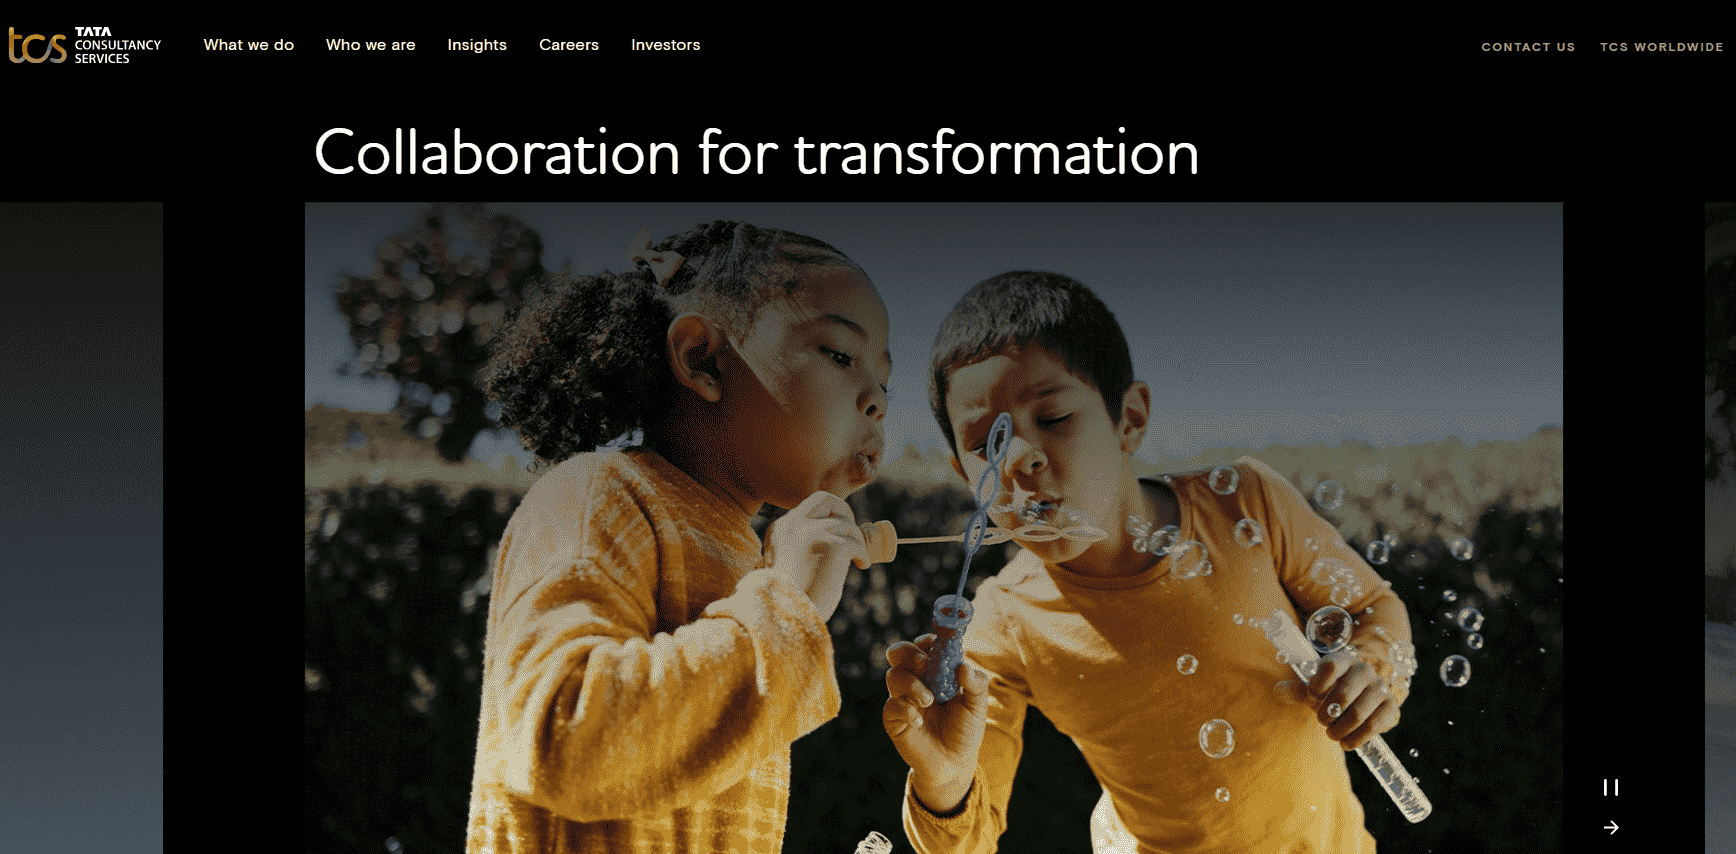 Tata Consultancy Services (TCS) webpage written, collaboration for transformation on it.